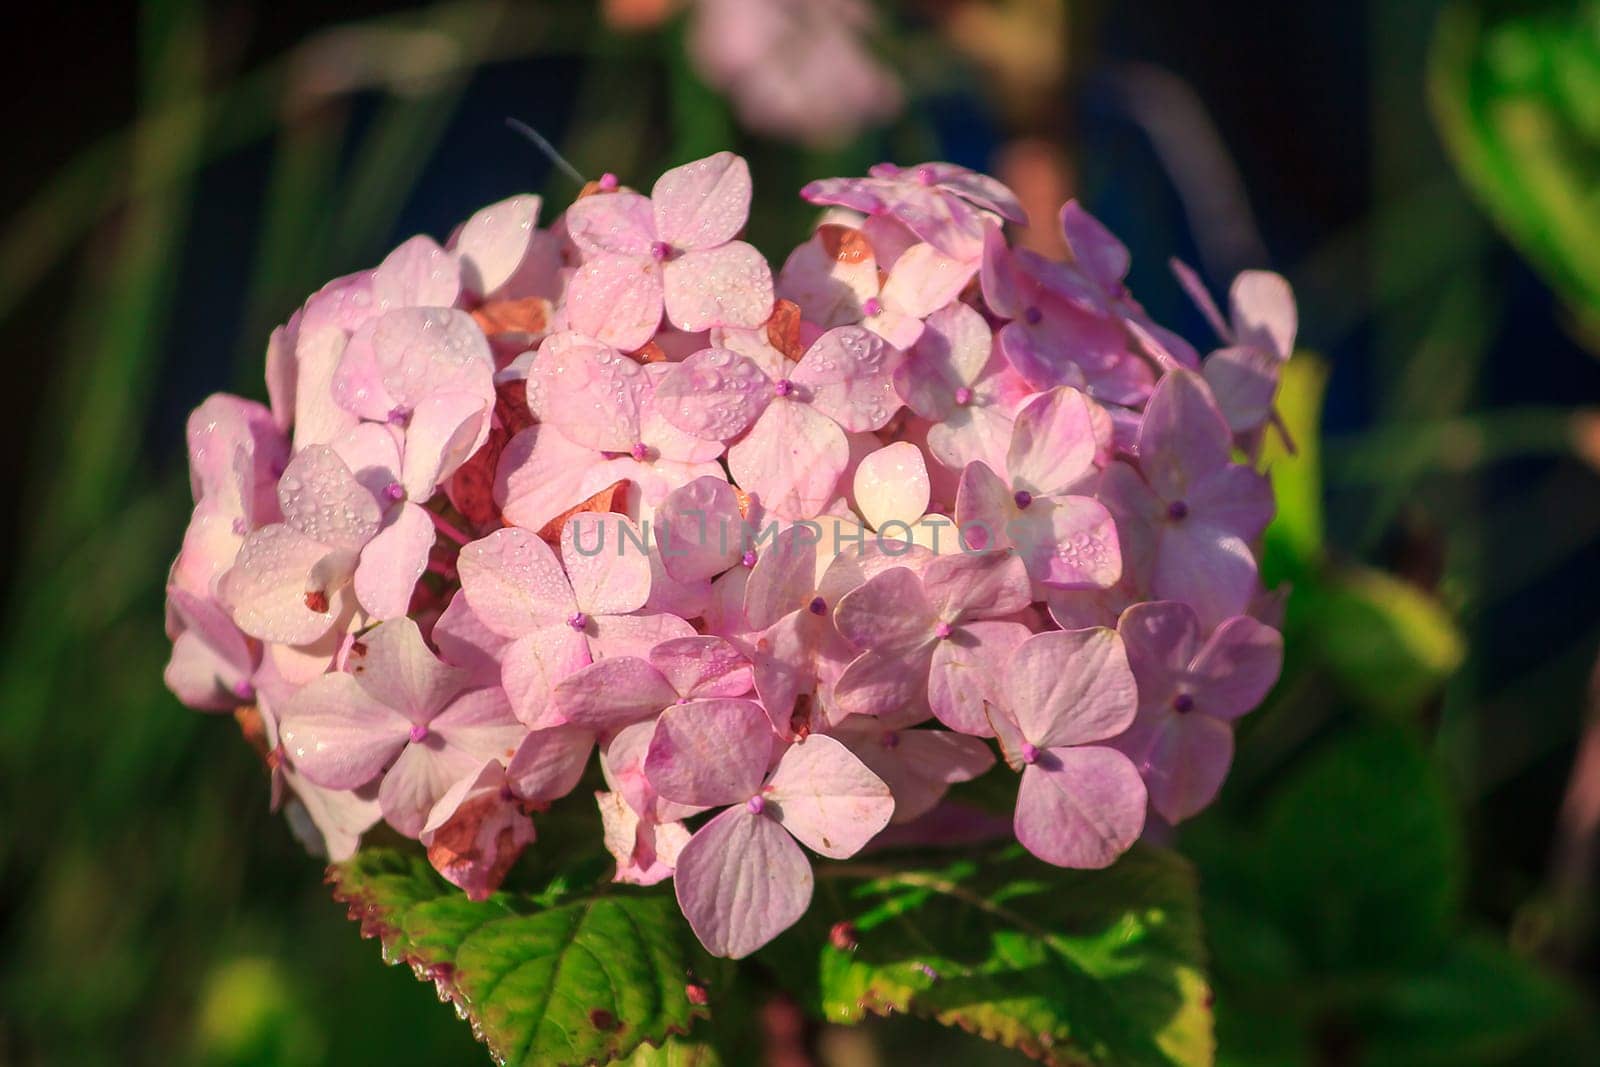 A large pink hydrangea is blooming in the garden.